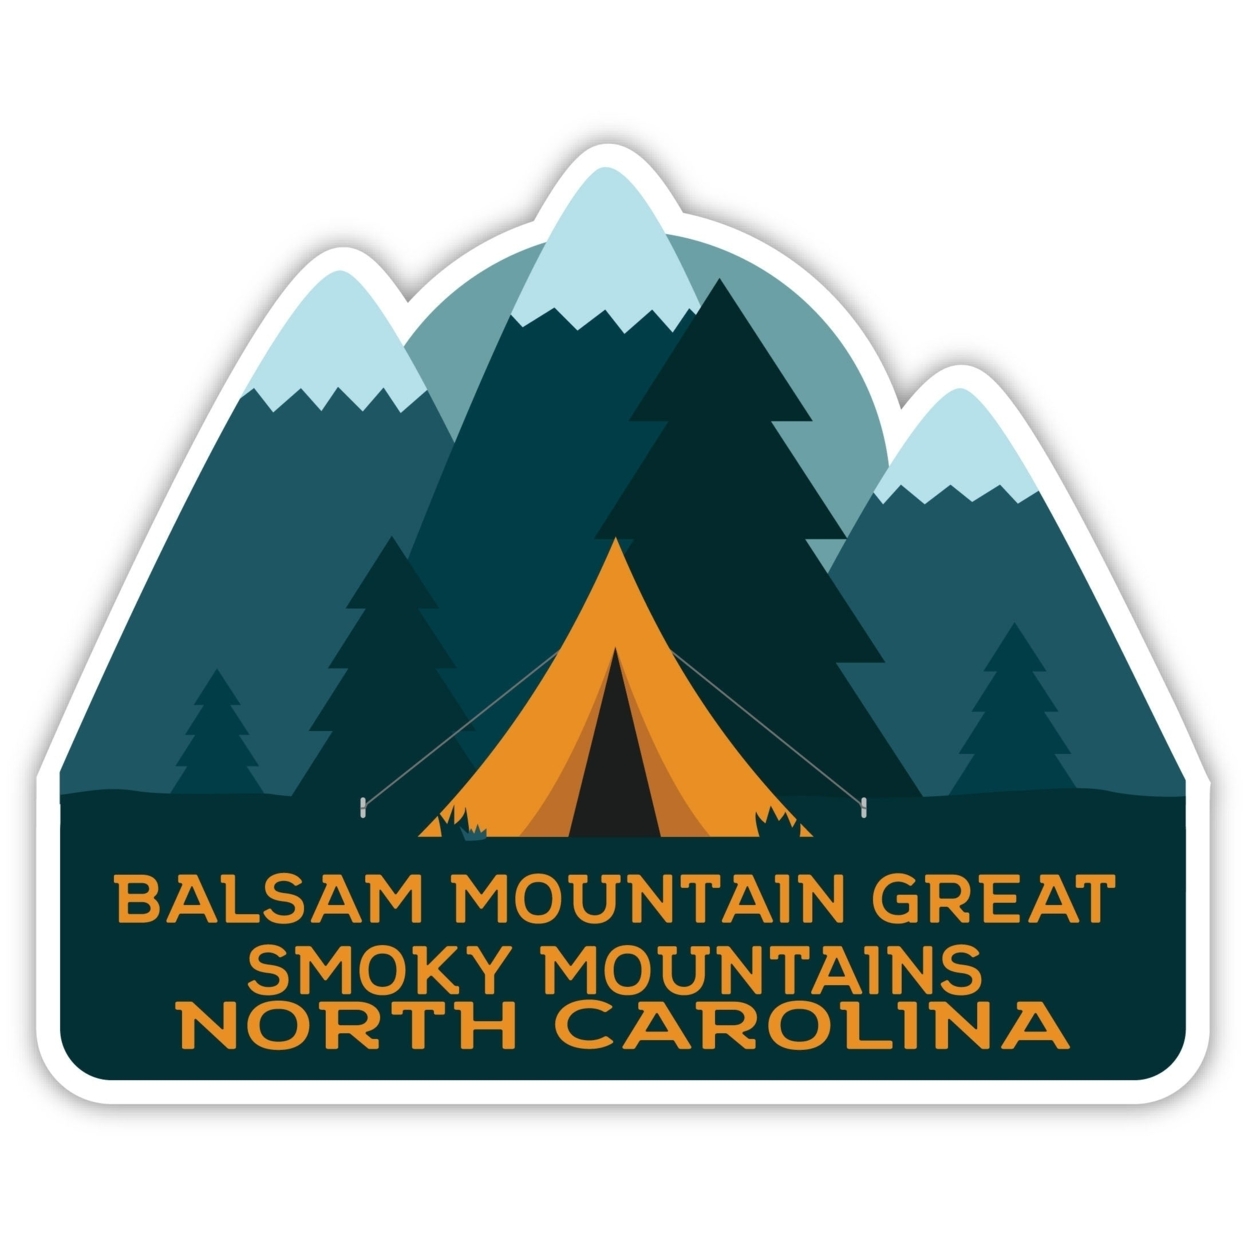 Balsam Mountain Great Smoky Mountains North Carolina Souvenir Decorative Stickers (Choose Theme And Size) - 4-Pack, 8-Inch, Tent